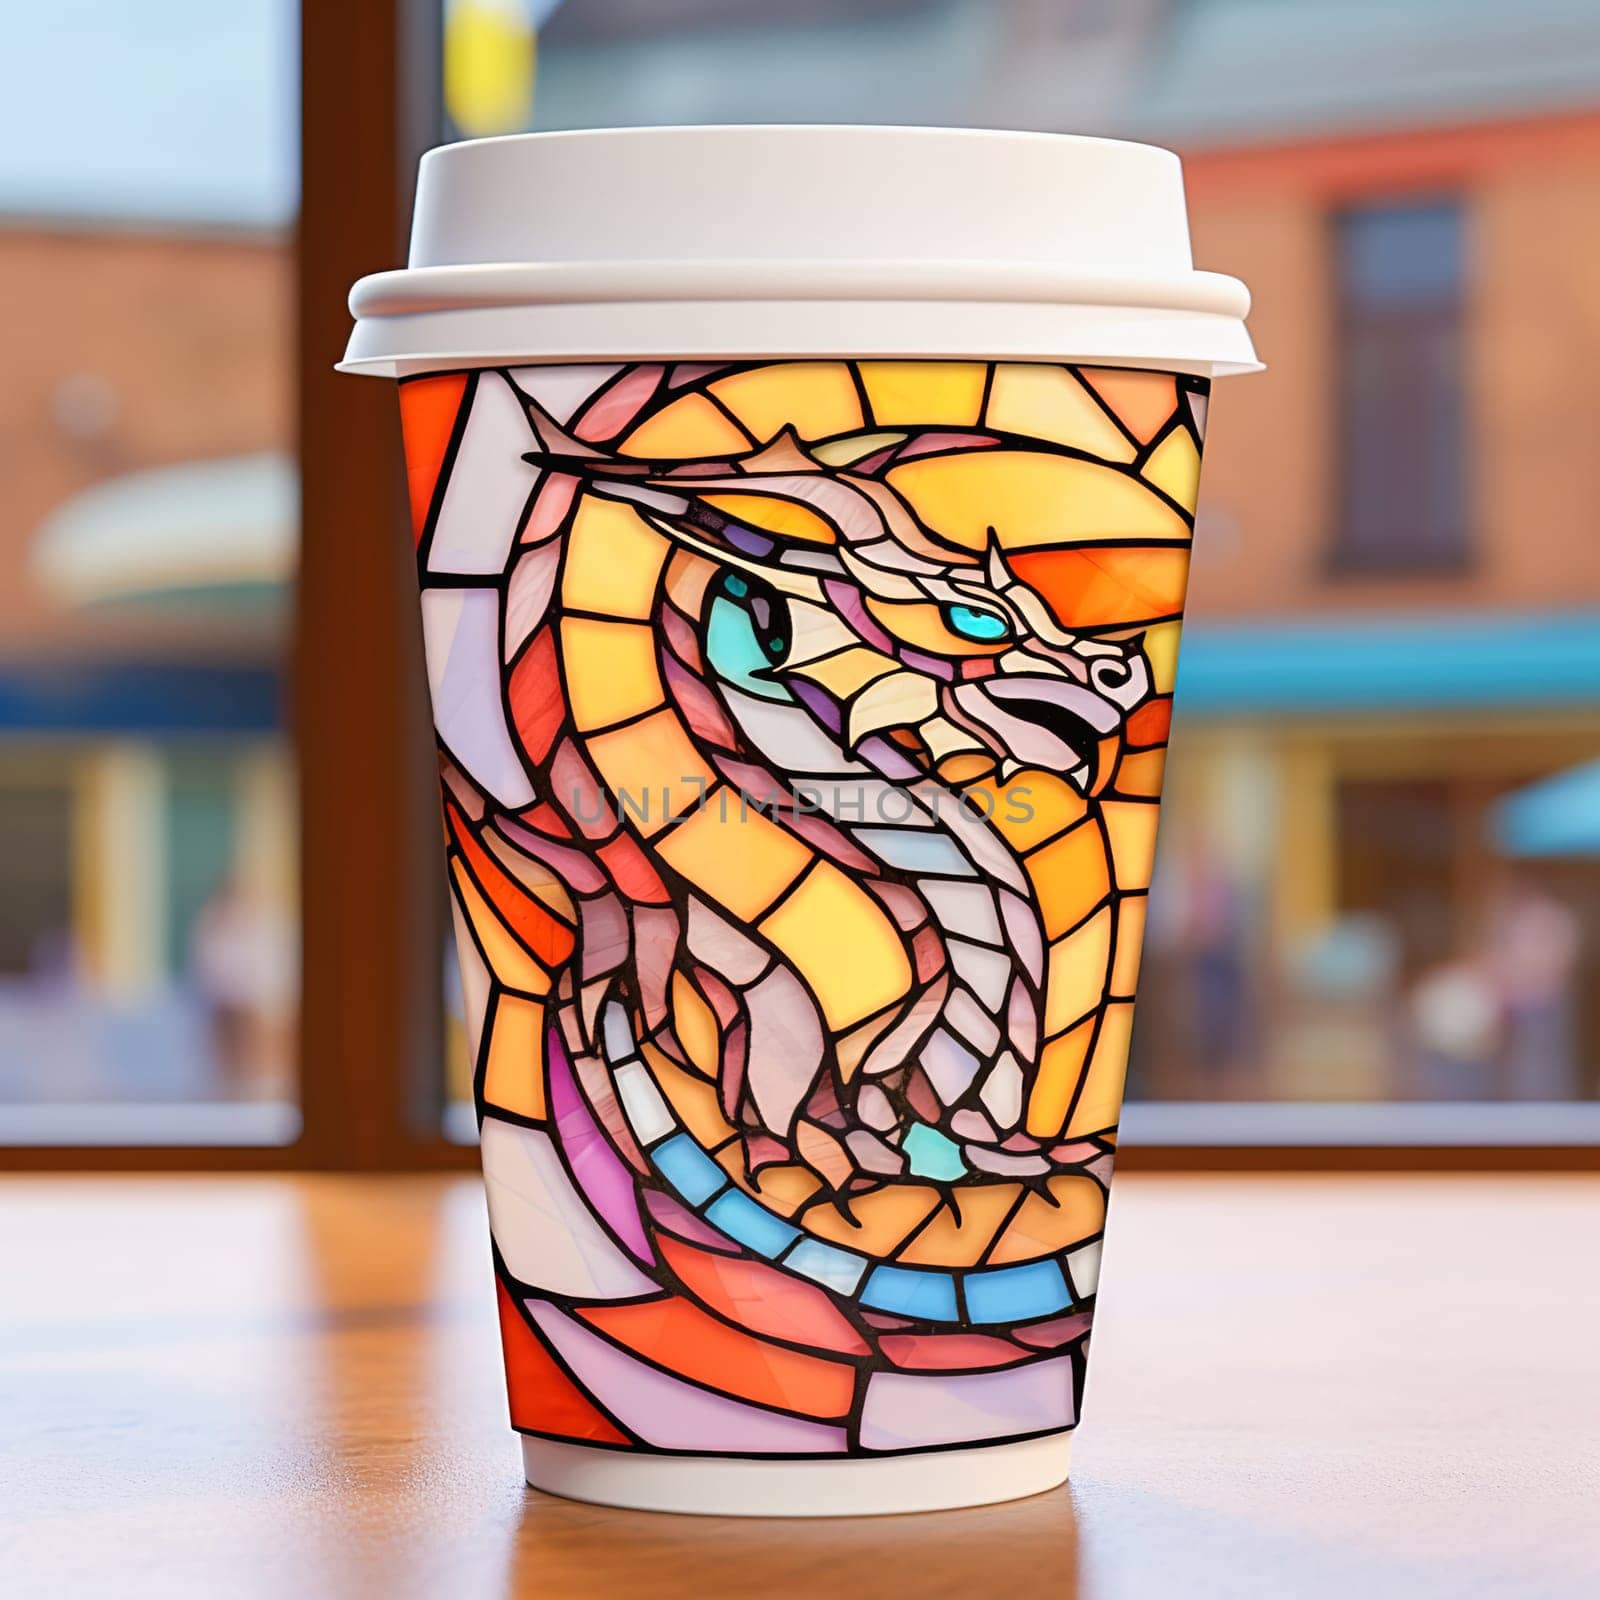 A paper coffee cup with an image of a dragon, the symbol of the year. by Yurich32